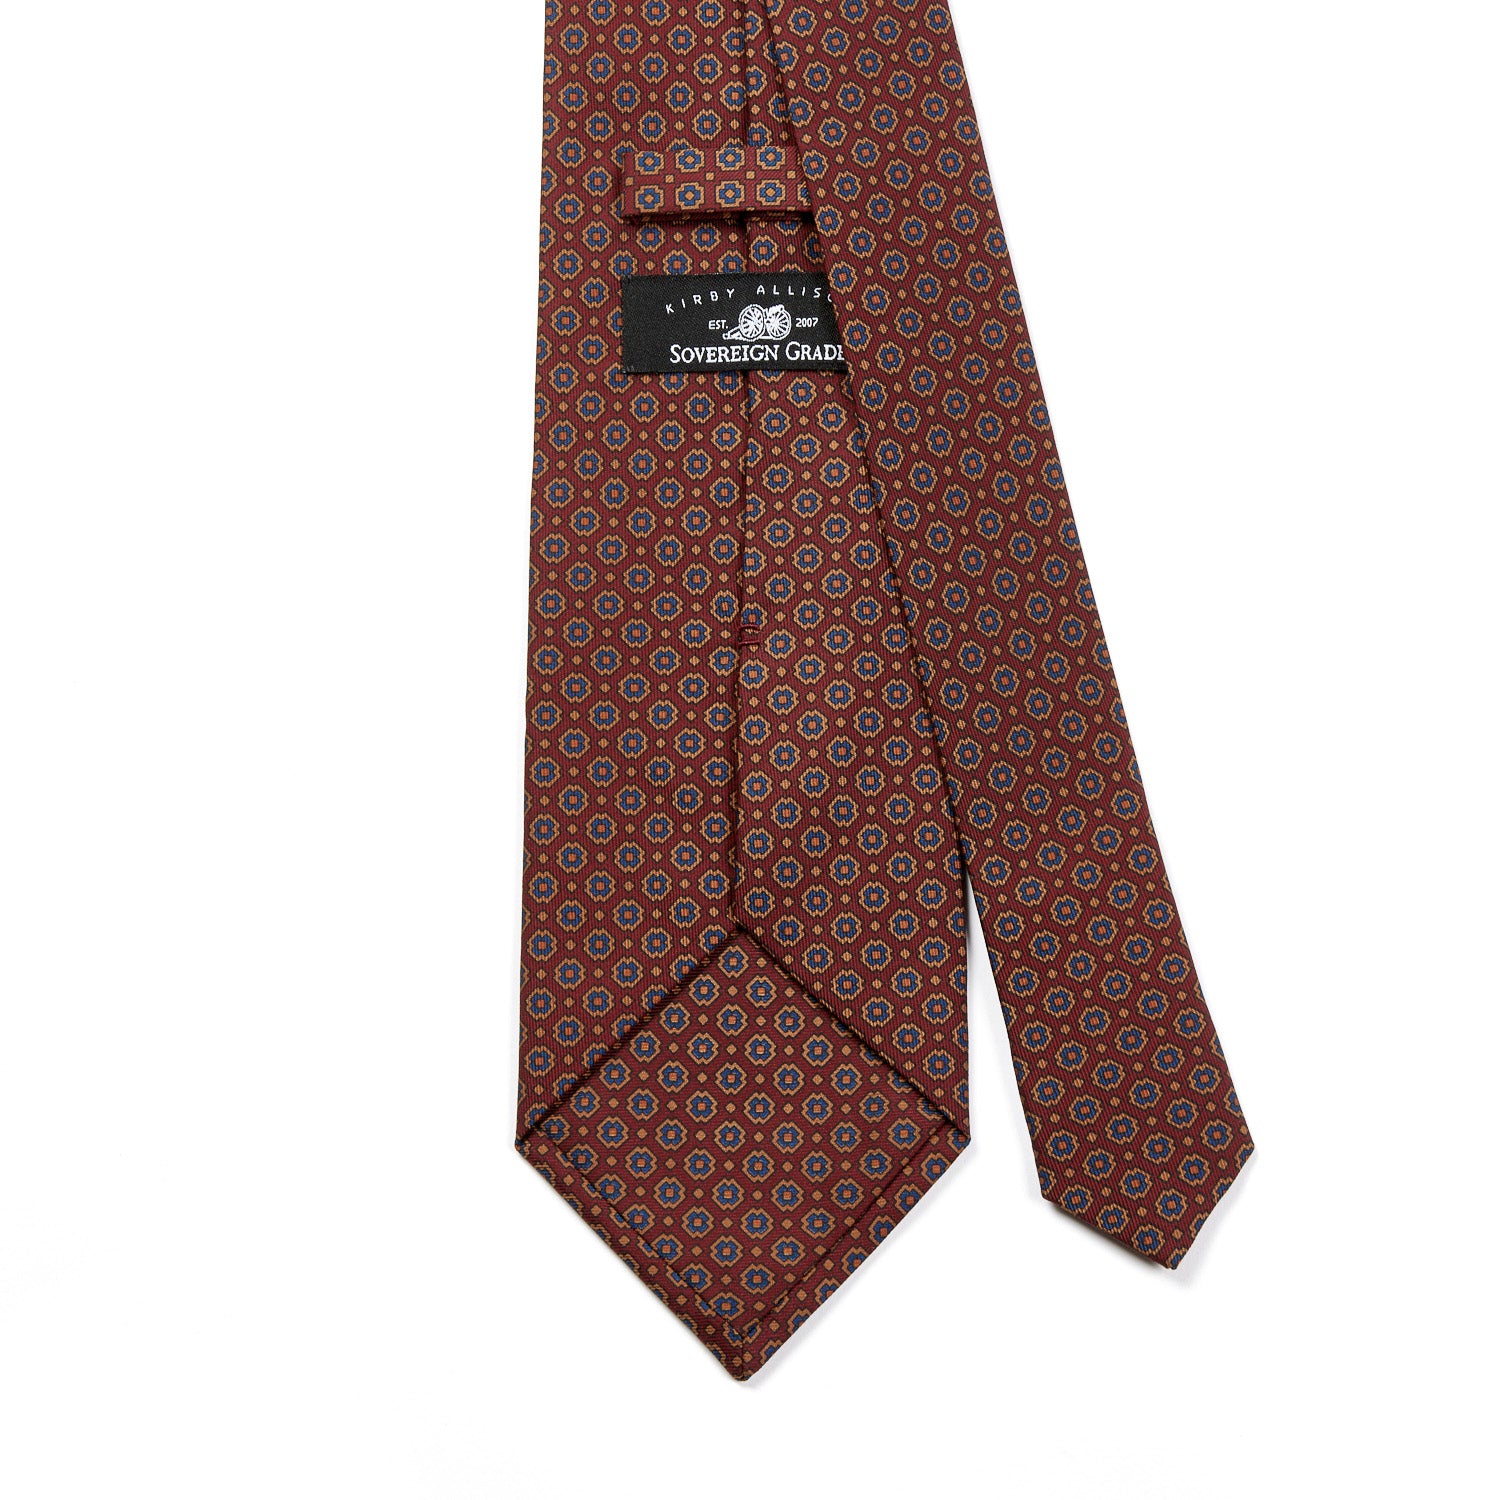 A Sovereign Grade Rust Small Floral Ancient Madder Tie, handmade by KirbyAllison.com in the United Kingdom with the highest quality craftsmanship.